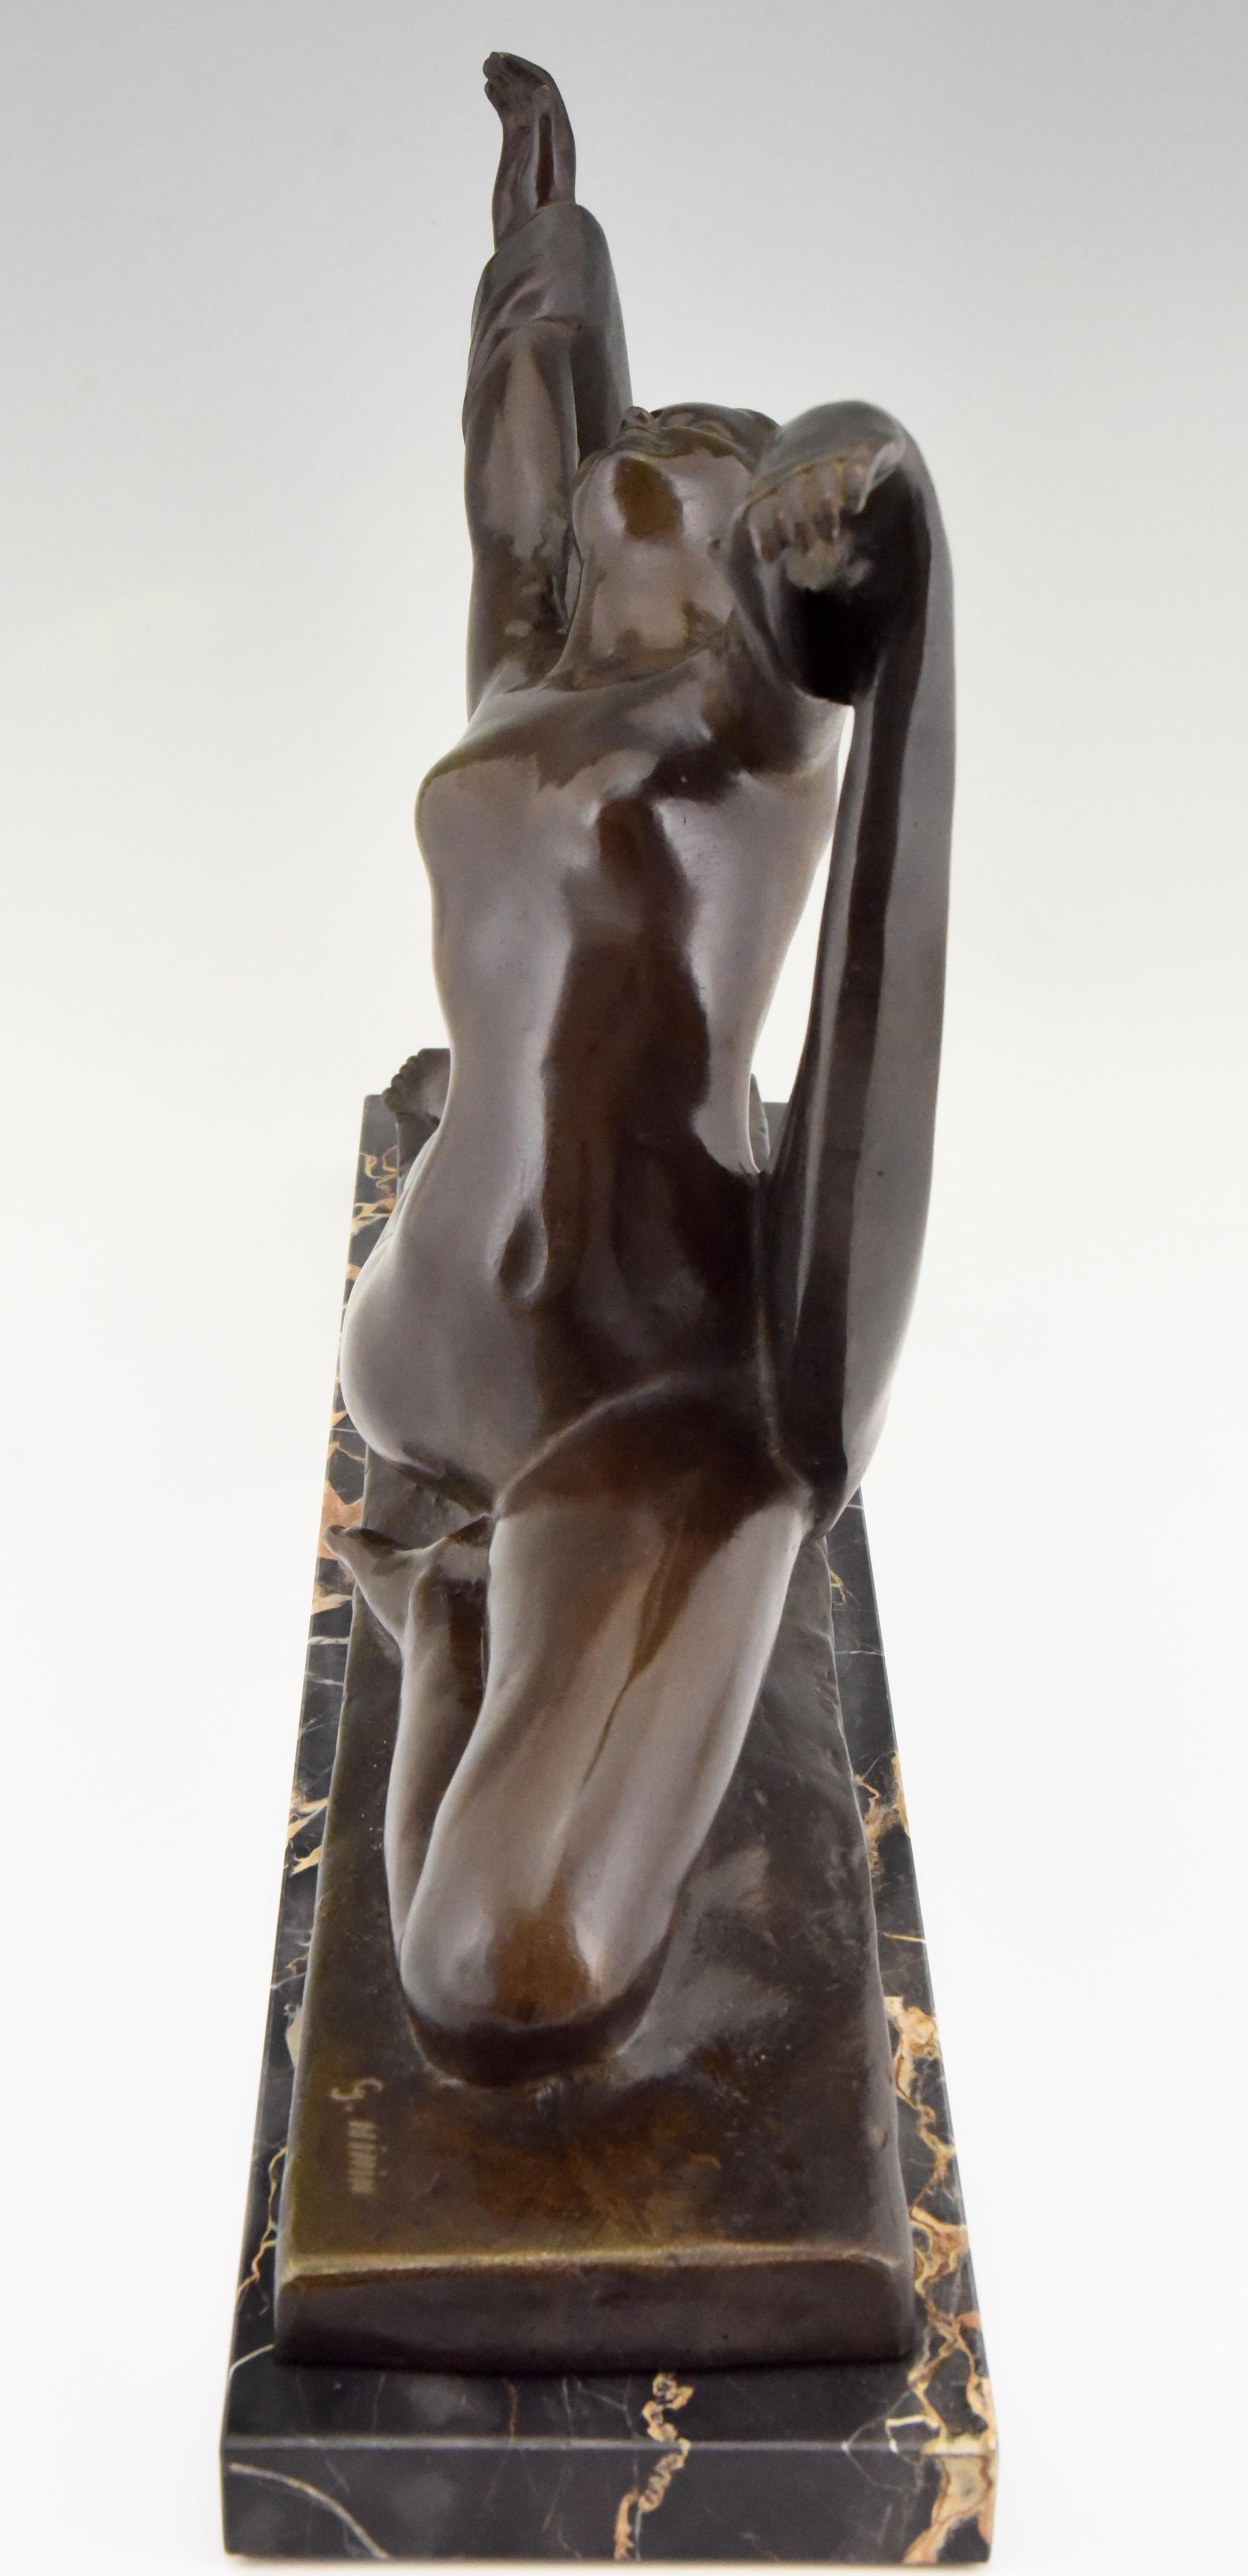 French Art Deco Bronze Sculpture Nude Lady, Scarf Dancer by G. Ninin, France, 1925